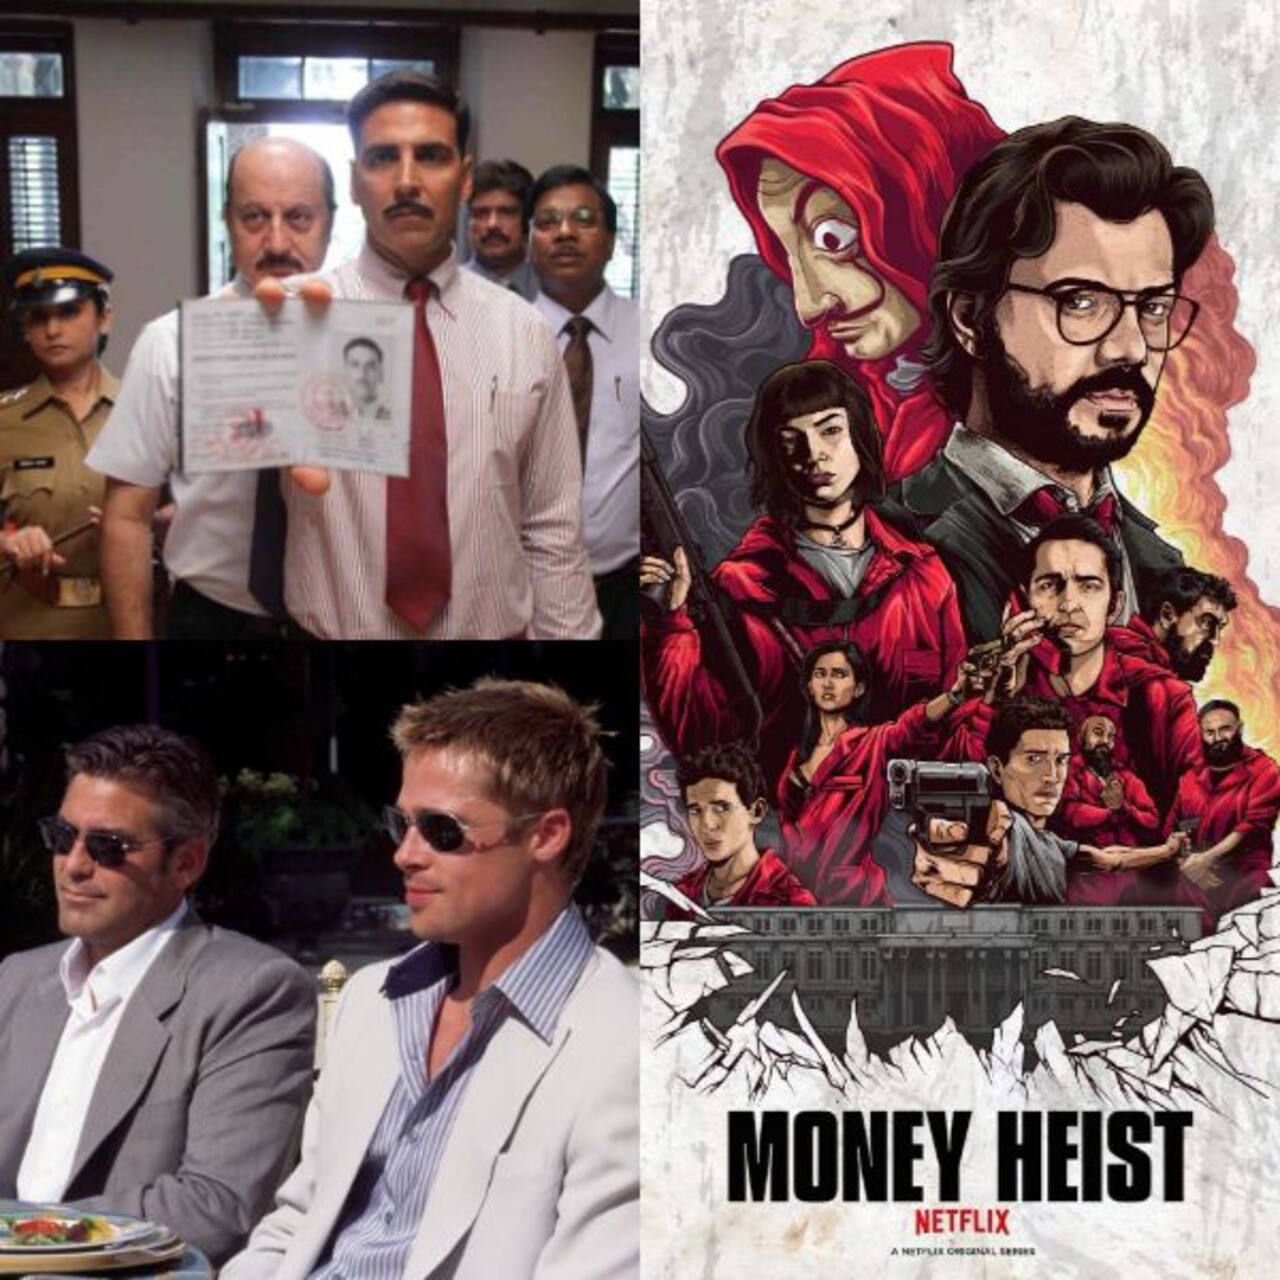 Need to fill the void left by Money Heist season 5? From Special 26 to Ocean's Eleven – here are 7 heist movies to watch right now on Netflix, Voot, Amazon Prime and Google Play